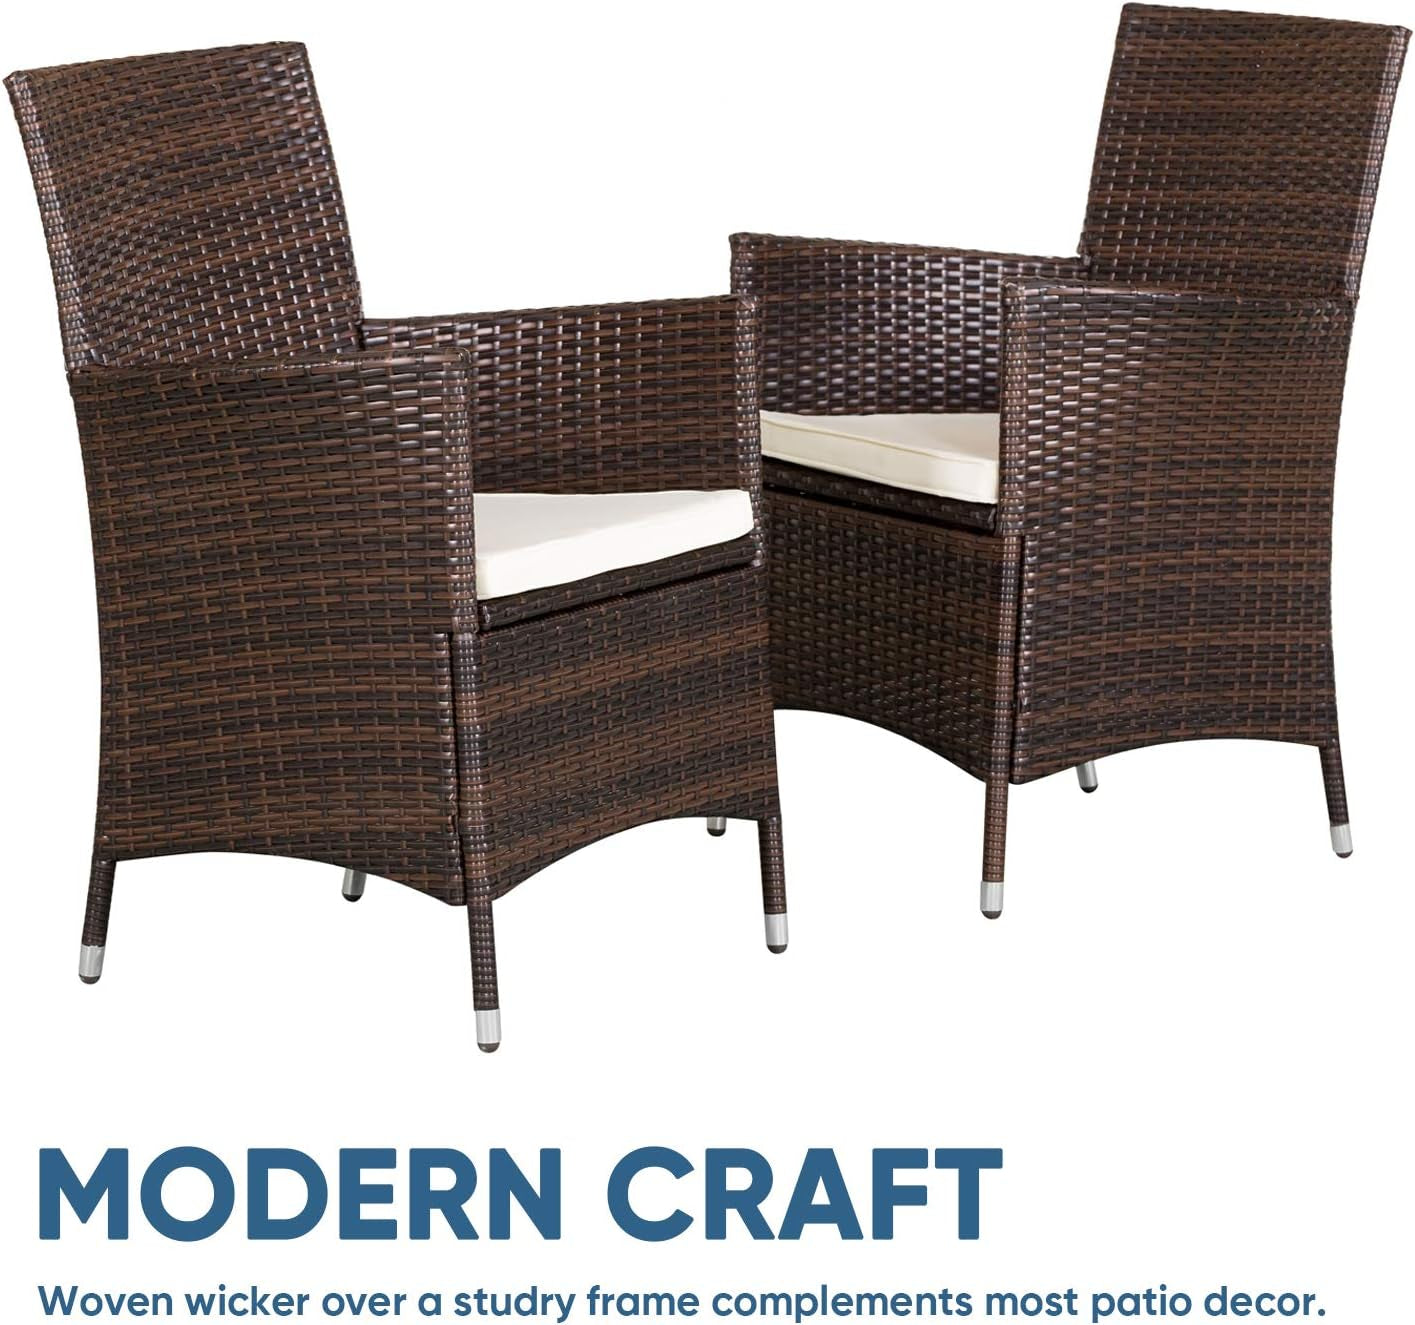 5 Pieces Patio Dining Table Set Brown Wicker Patio Furniture Sets Outdoor Dining Chairs Patio Set Clearance for Garden, Lawn, Balcony, Deck, and Poolside (Square)